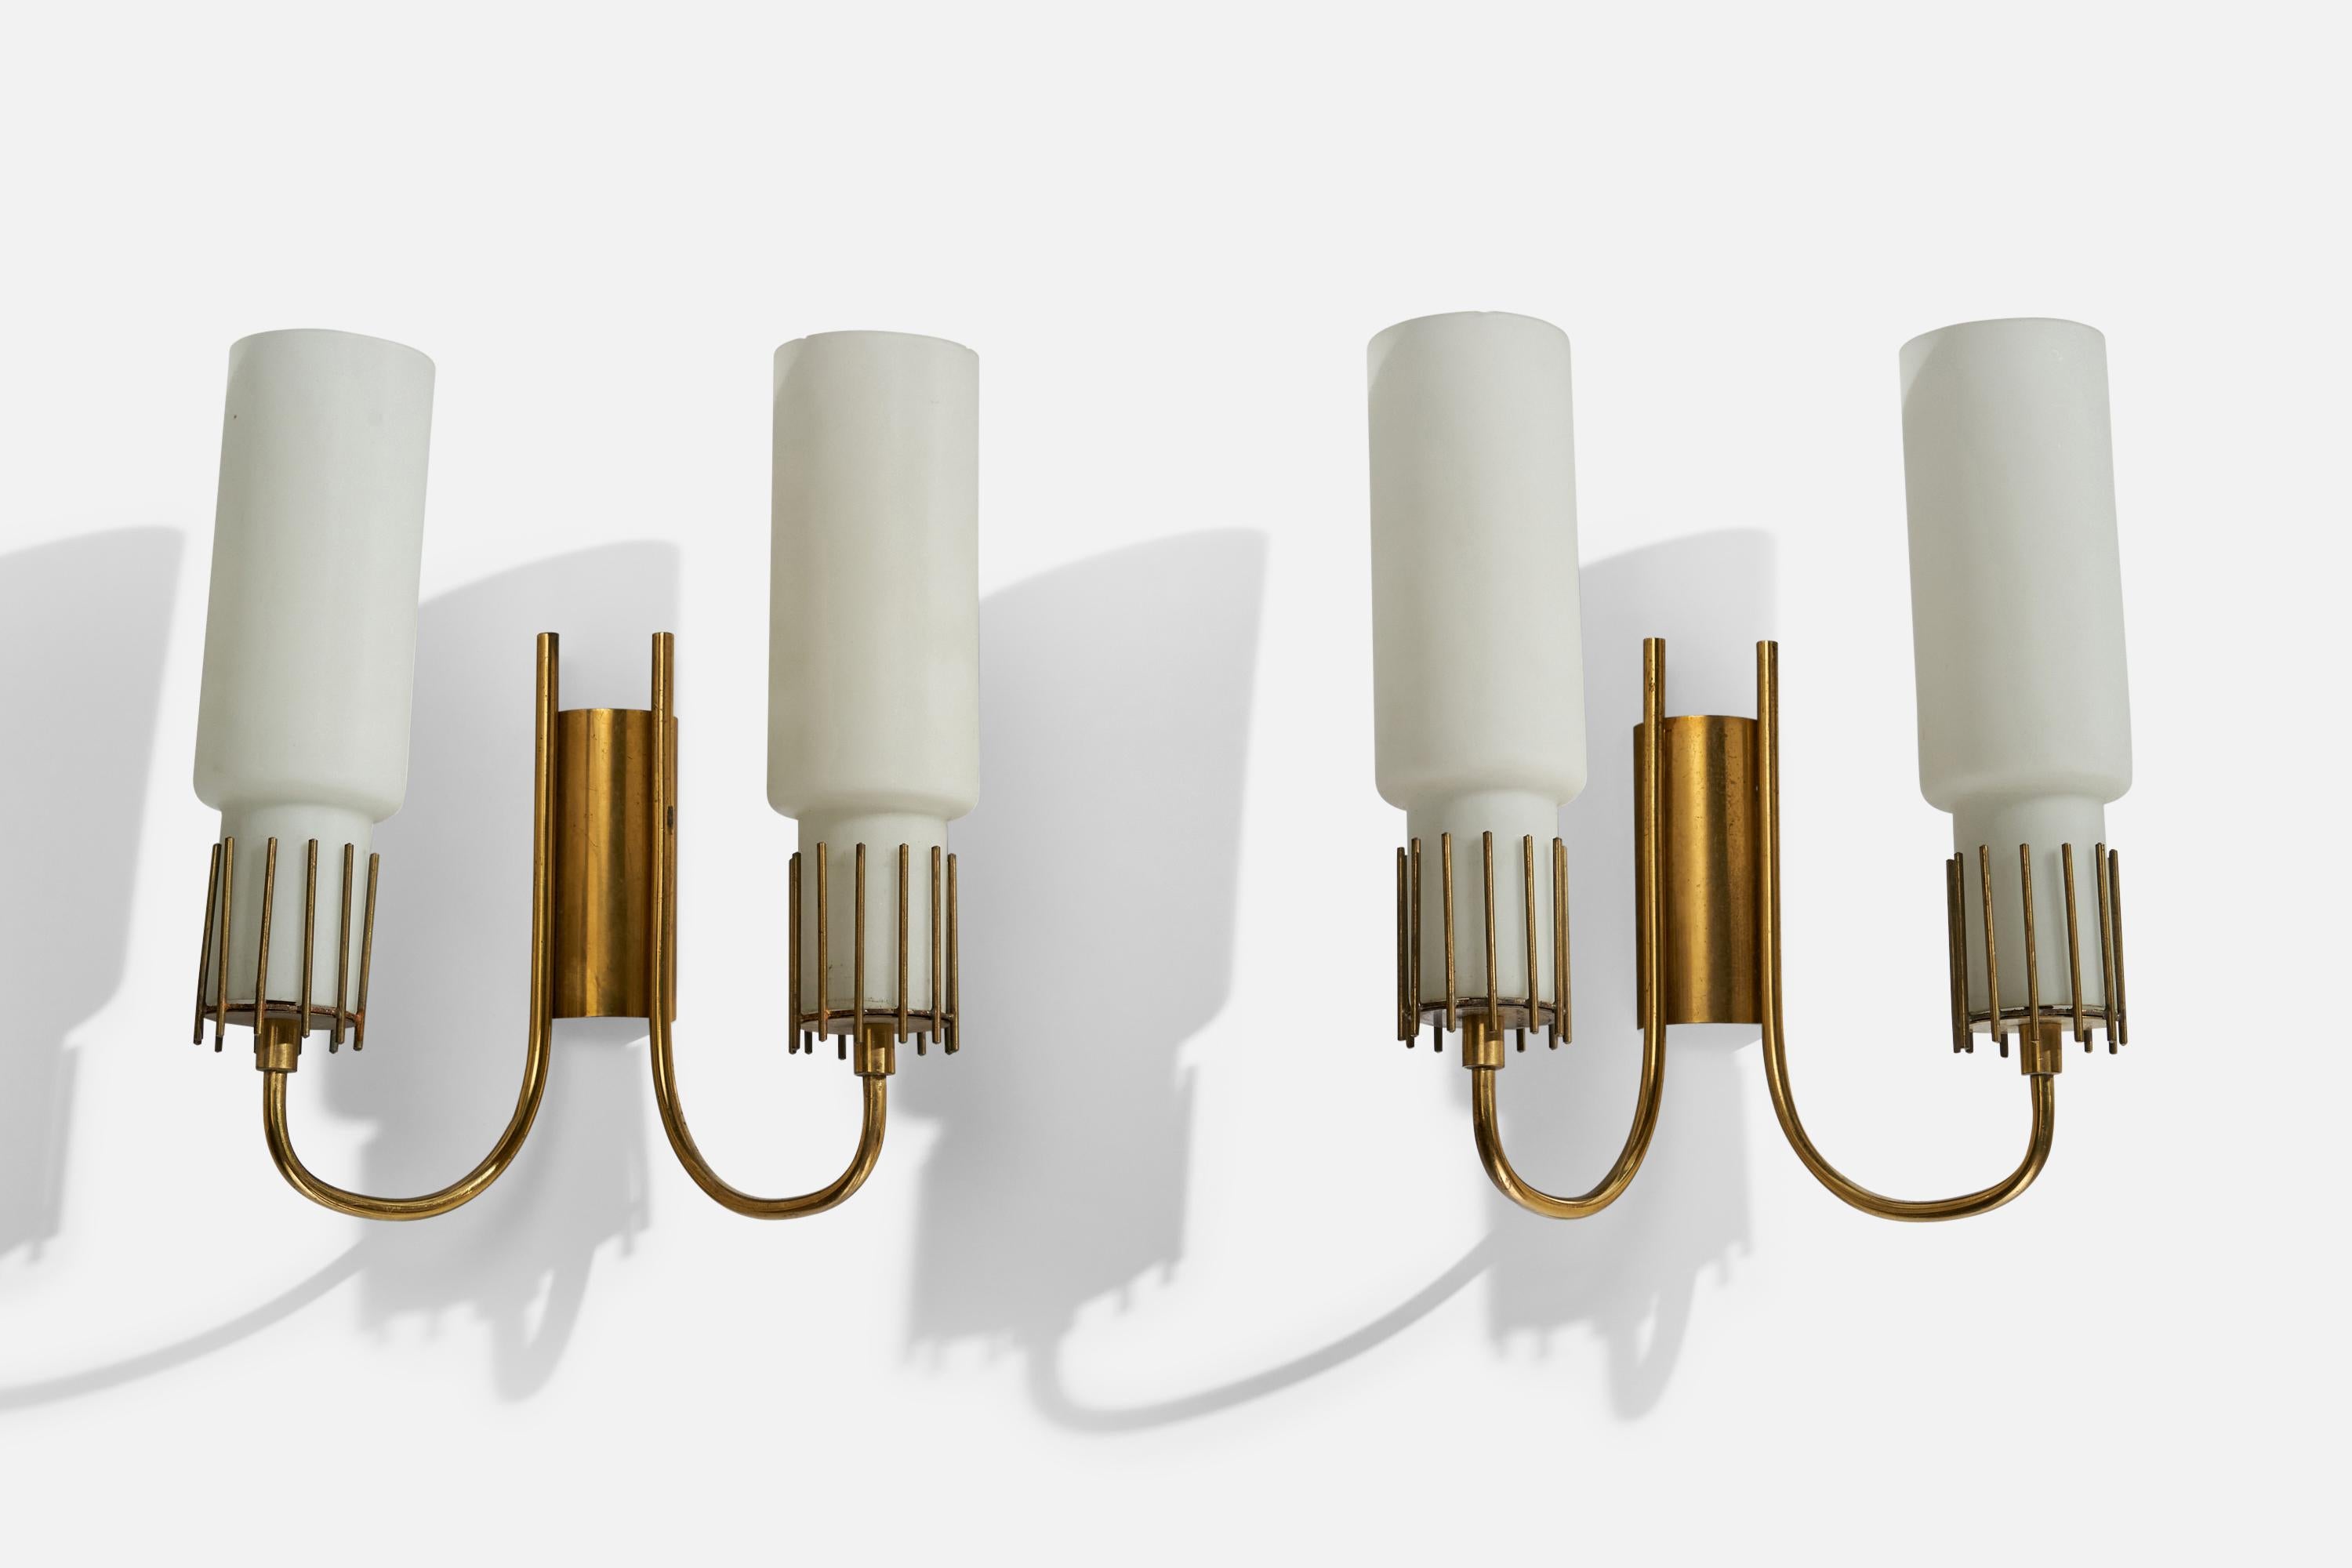 A pair of brass and opaline glass wall lights designed and produced in Italy, 1950s.

Overall Dimensions (inches): 11.6”  H x 10.25” W x 5.25” D
Back Plate Dimensions (inches): 4.25”  H x 1.95” W x 1”D
Bulb Specifications: E-14 Bulb
Number of